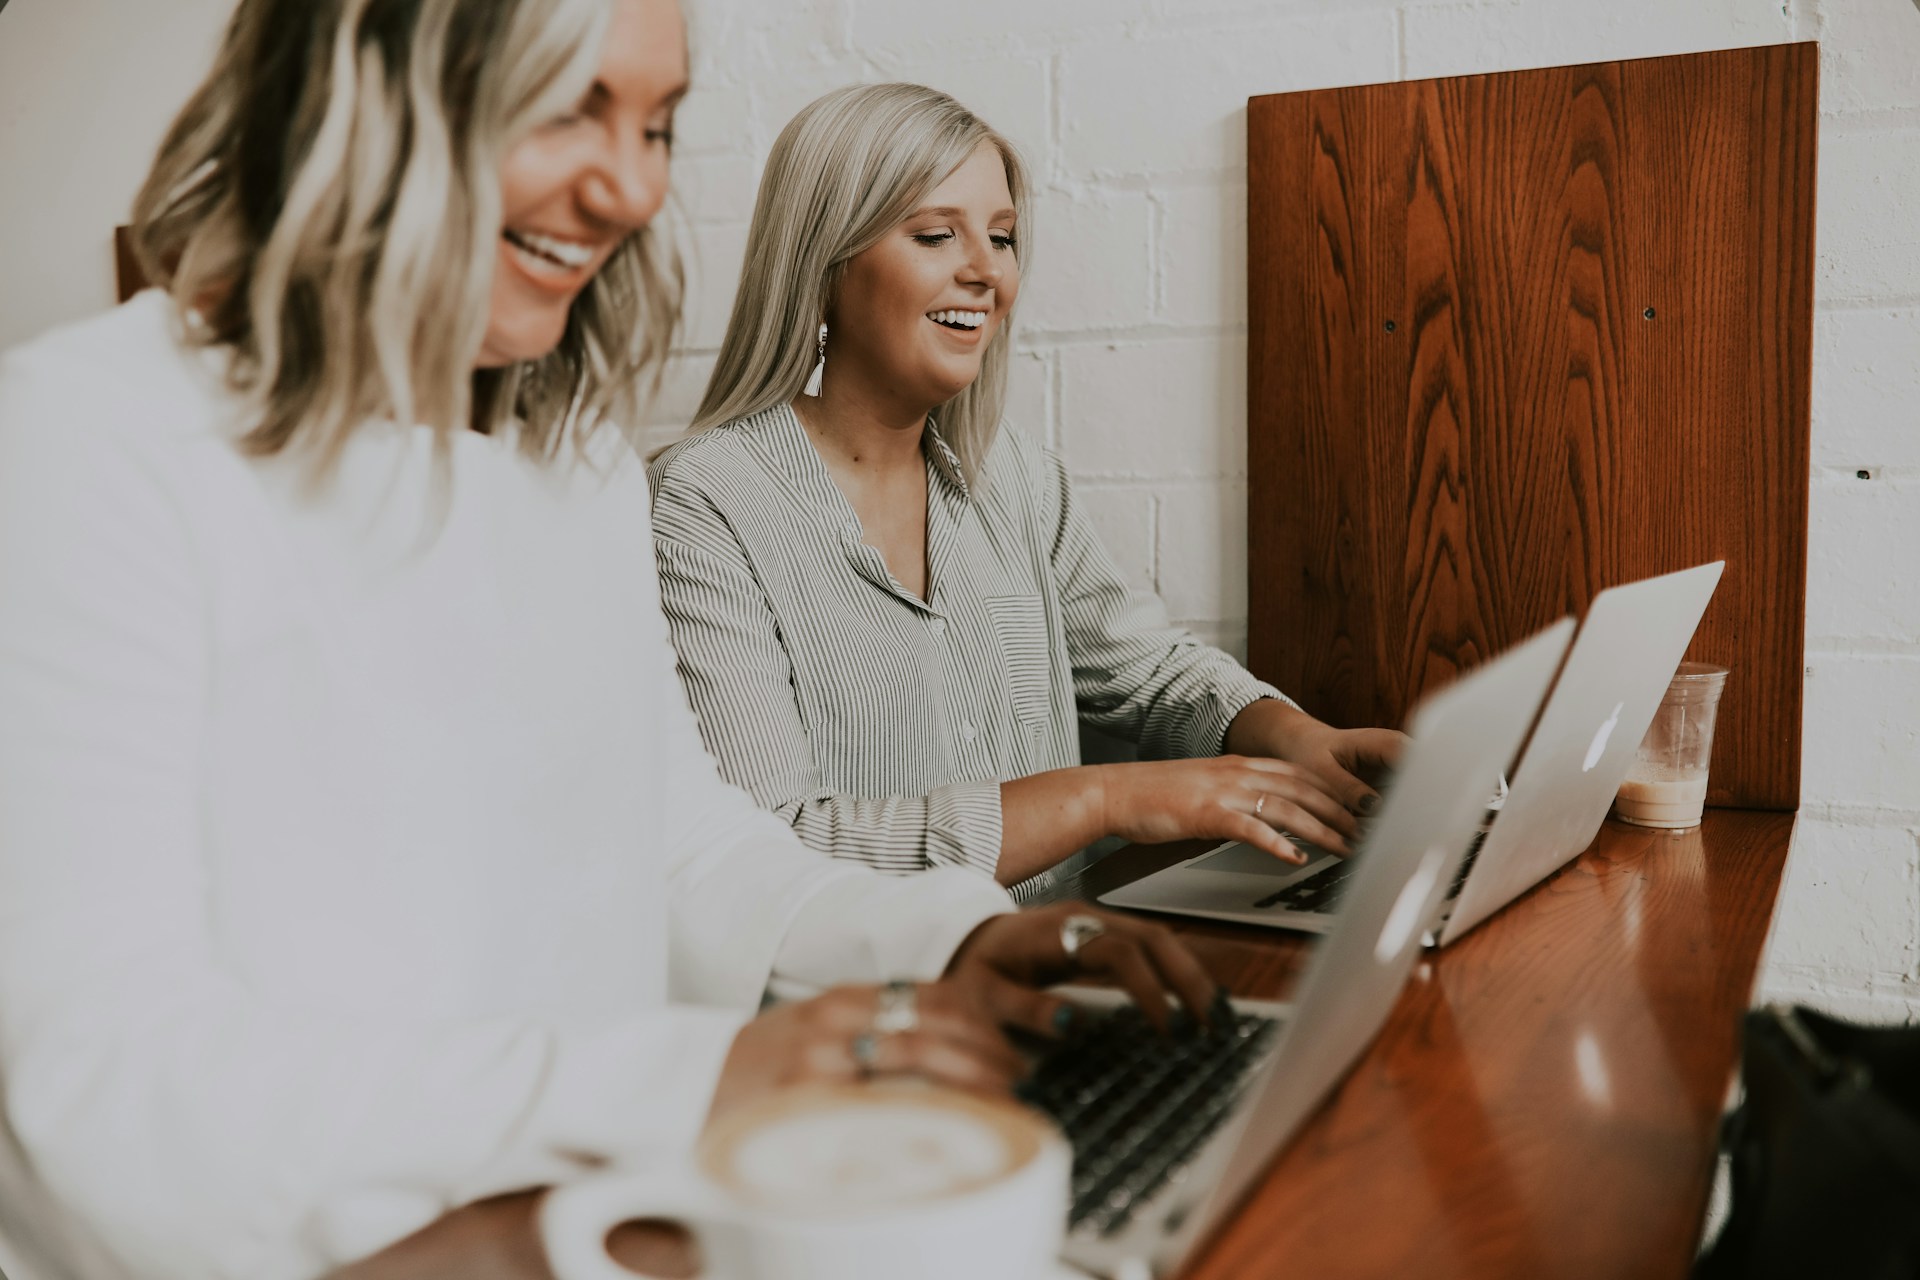 Two smiling women working on laptops.